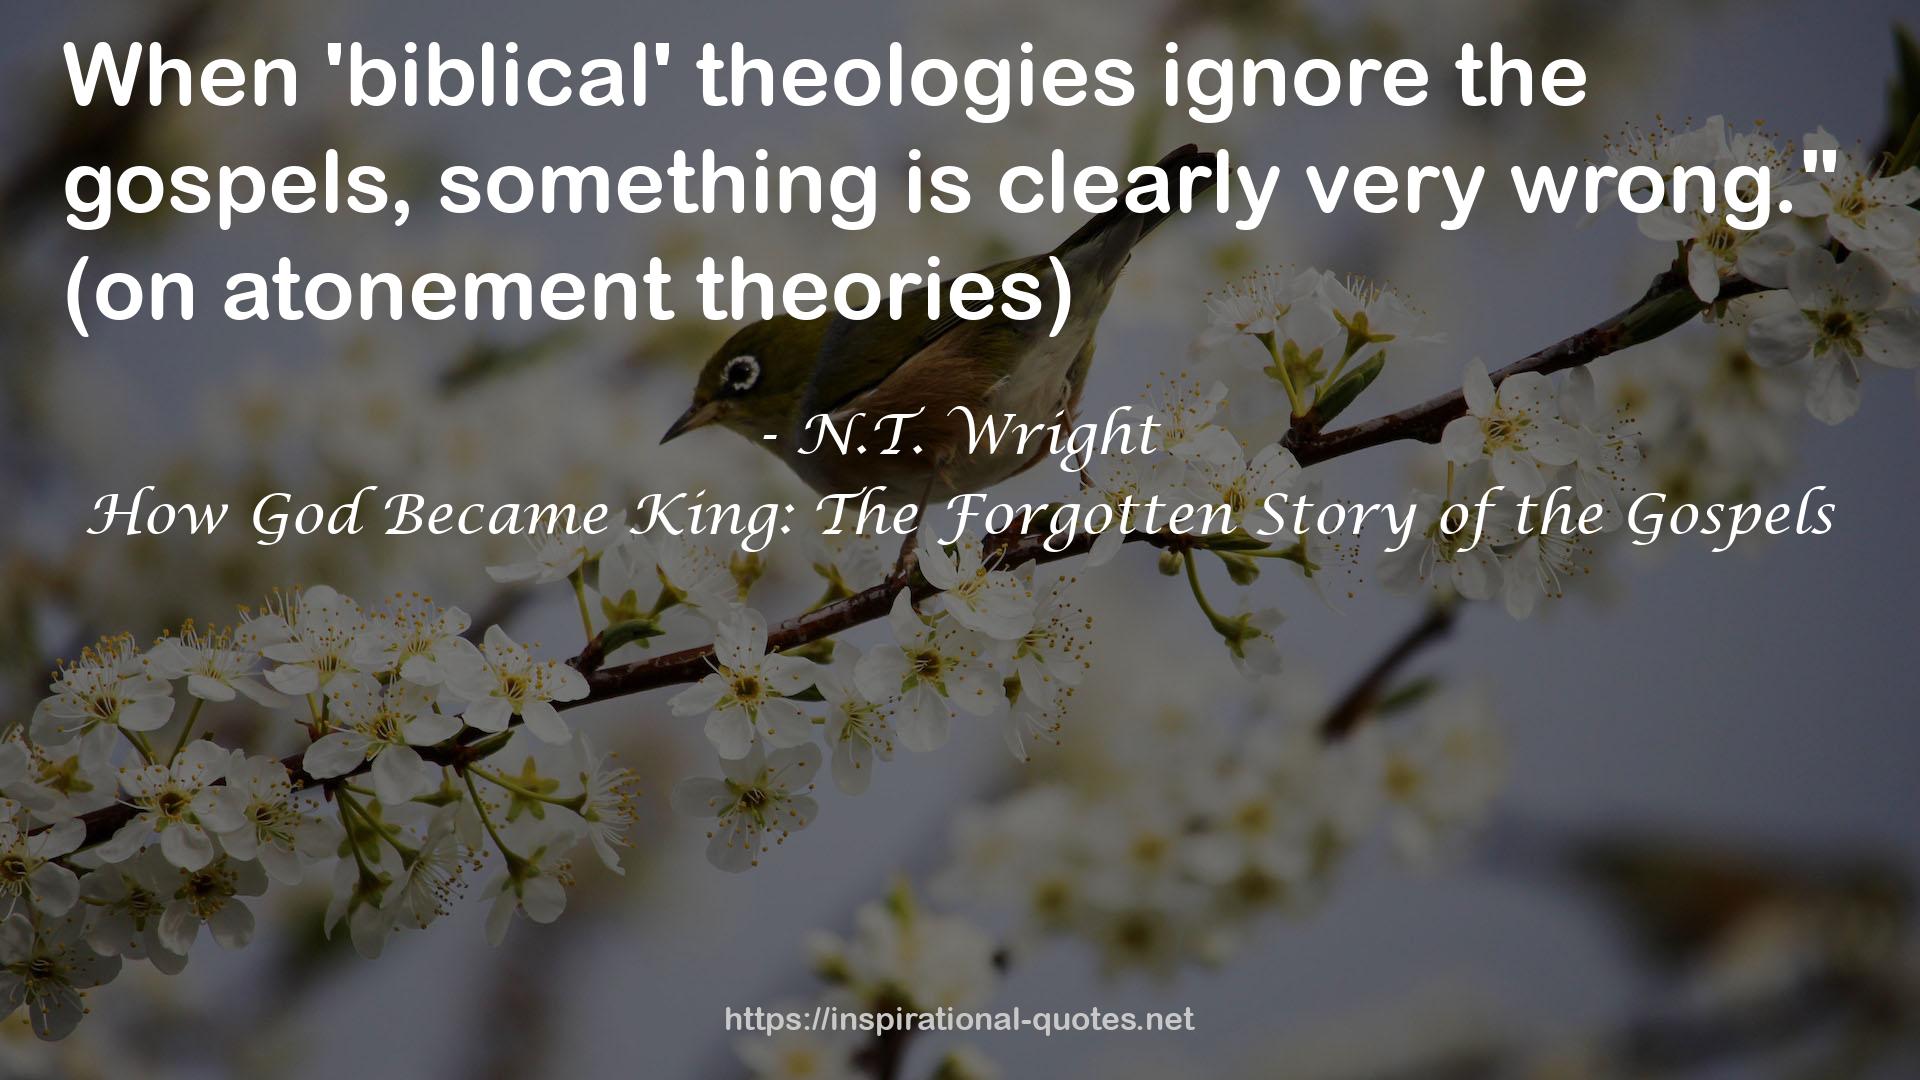 N.T. Wright QUOTES